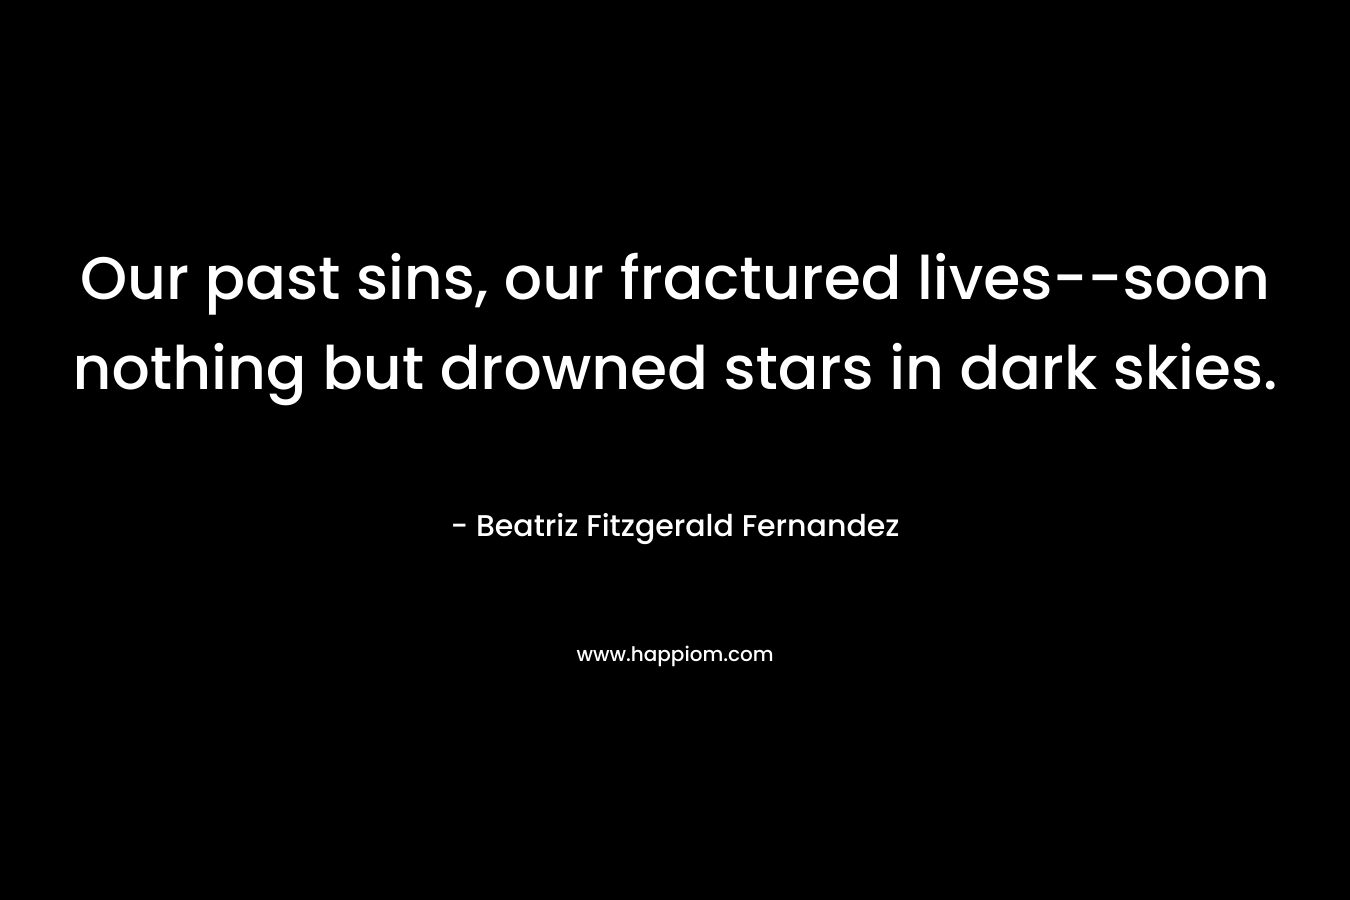 Our past sins, our fractured lives–soon nothing but drowned stars in dark skies. – Beatriz Fitzgerald Fernandez